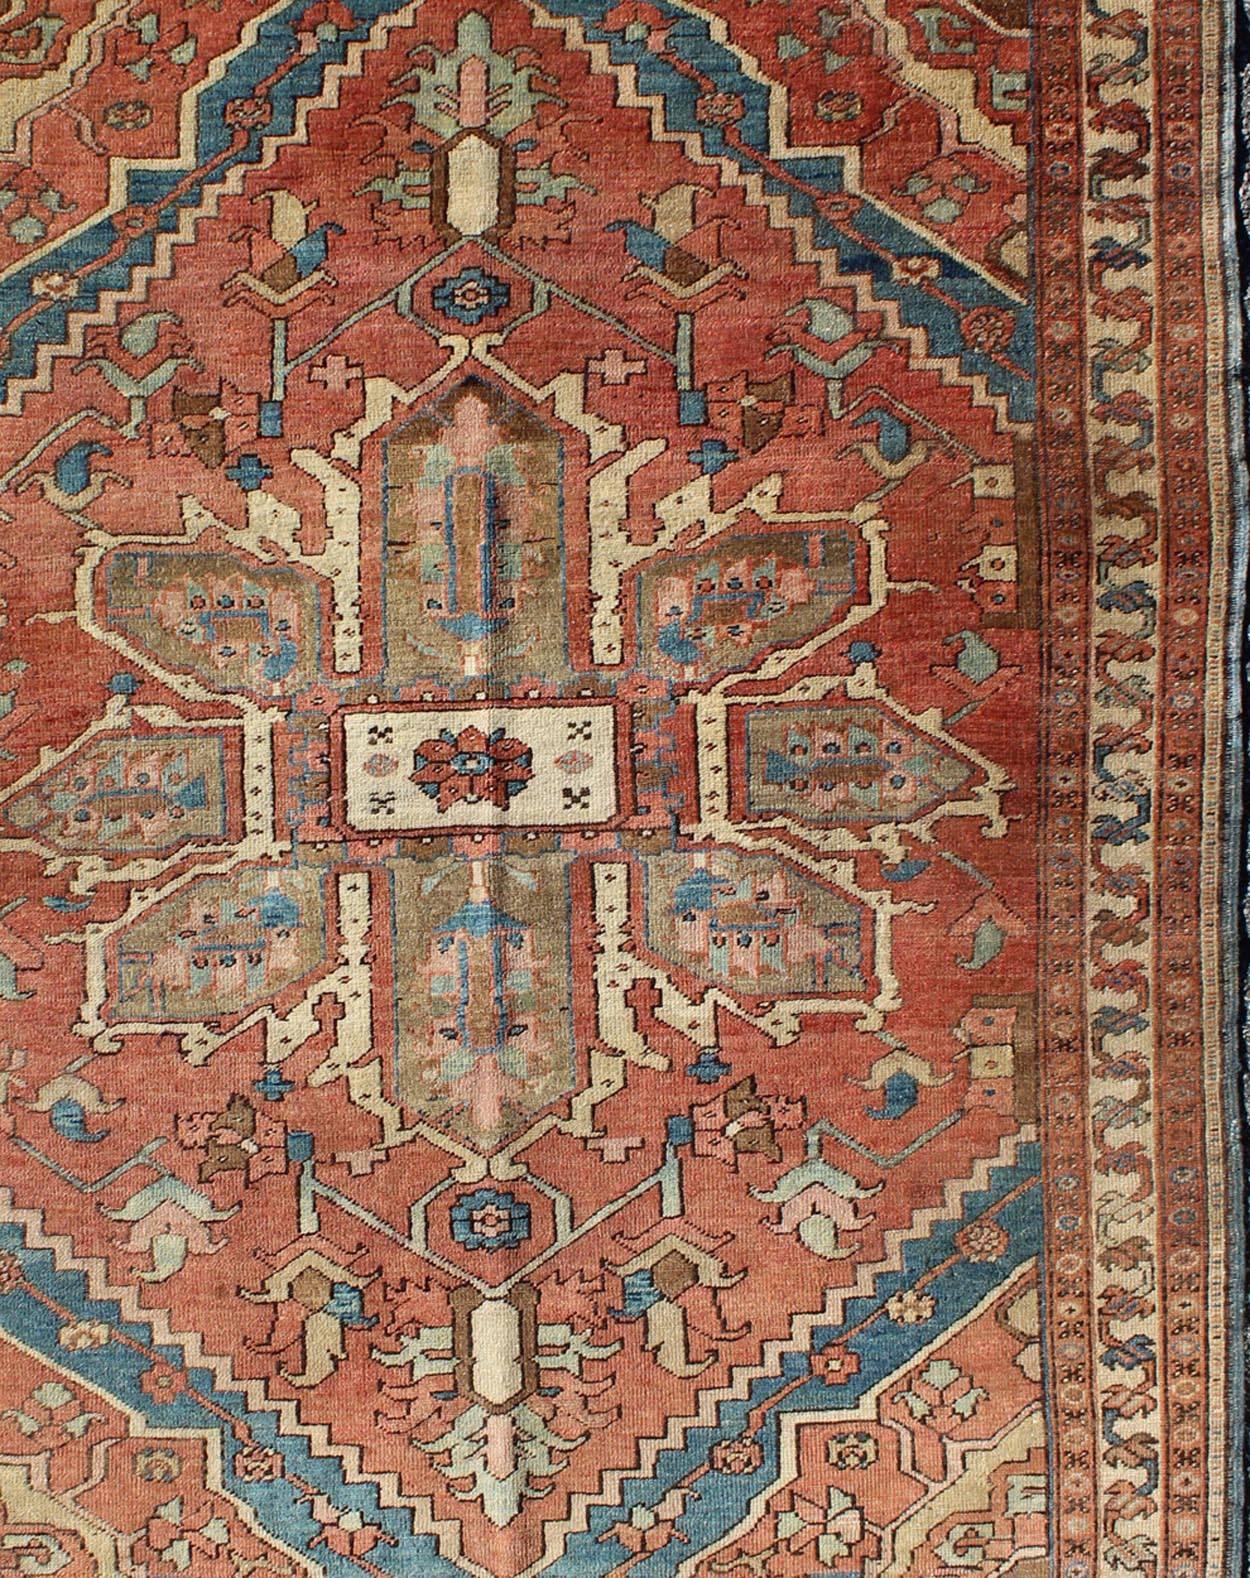 19th Century Antique Persian Small Serapi Carpet in Salmon, Light Blue and Ivory